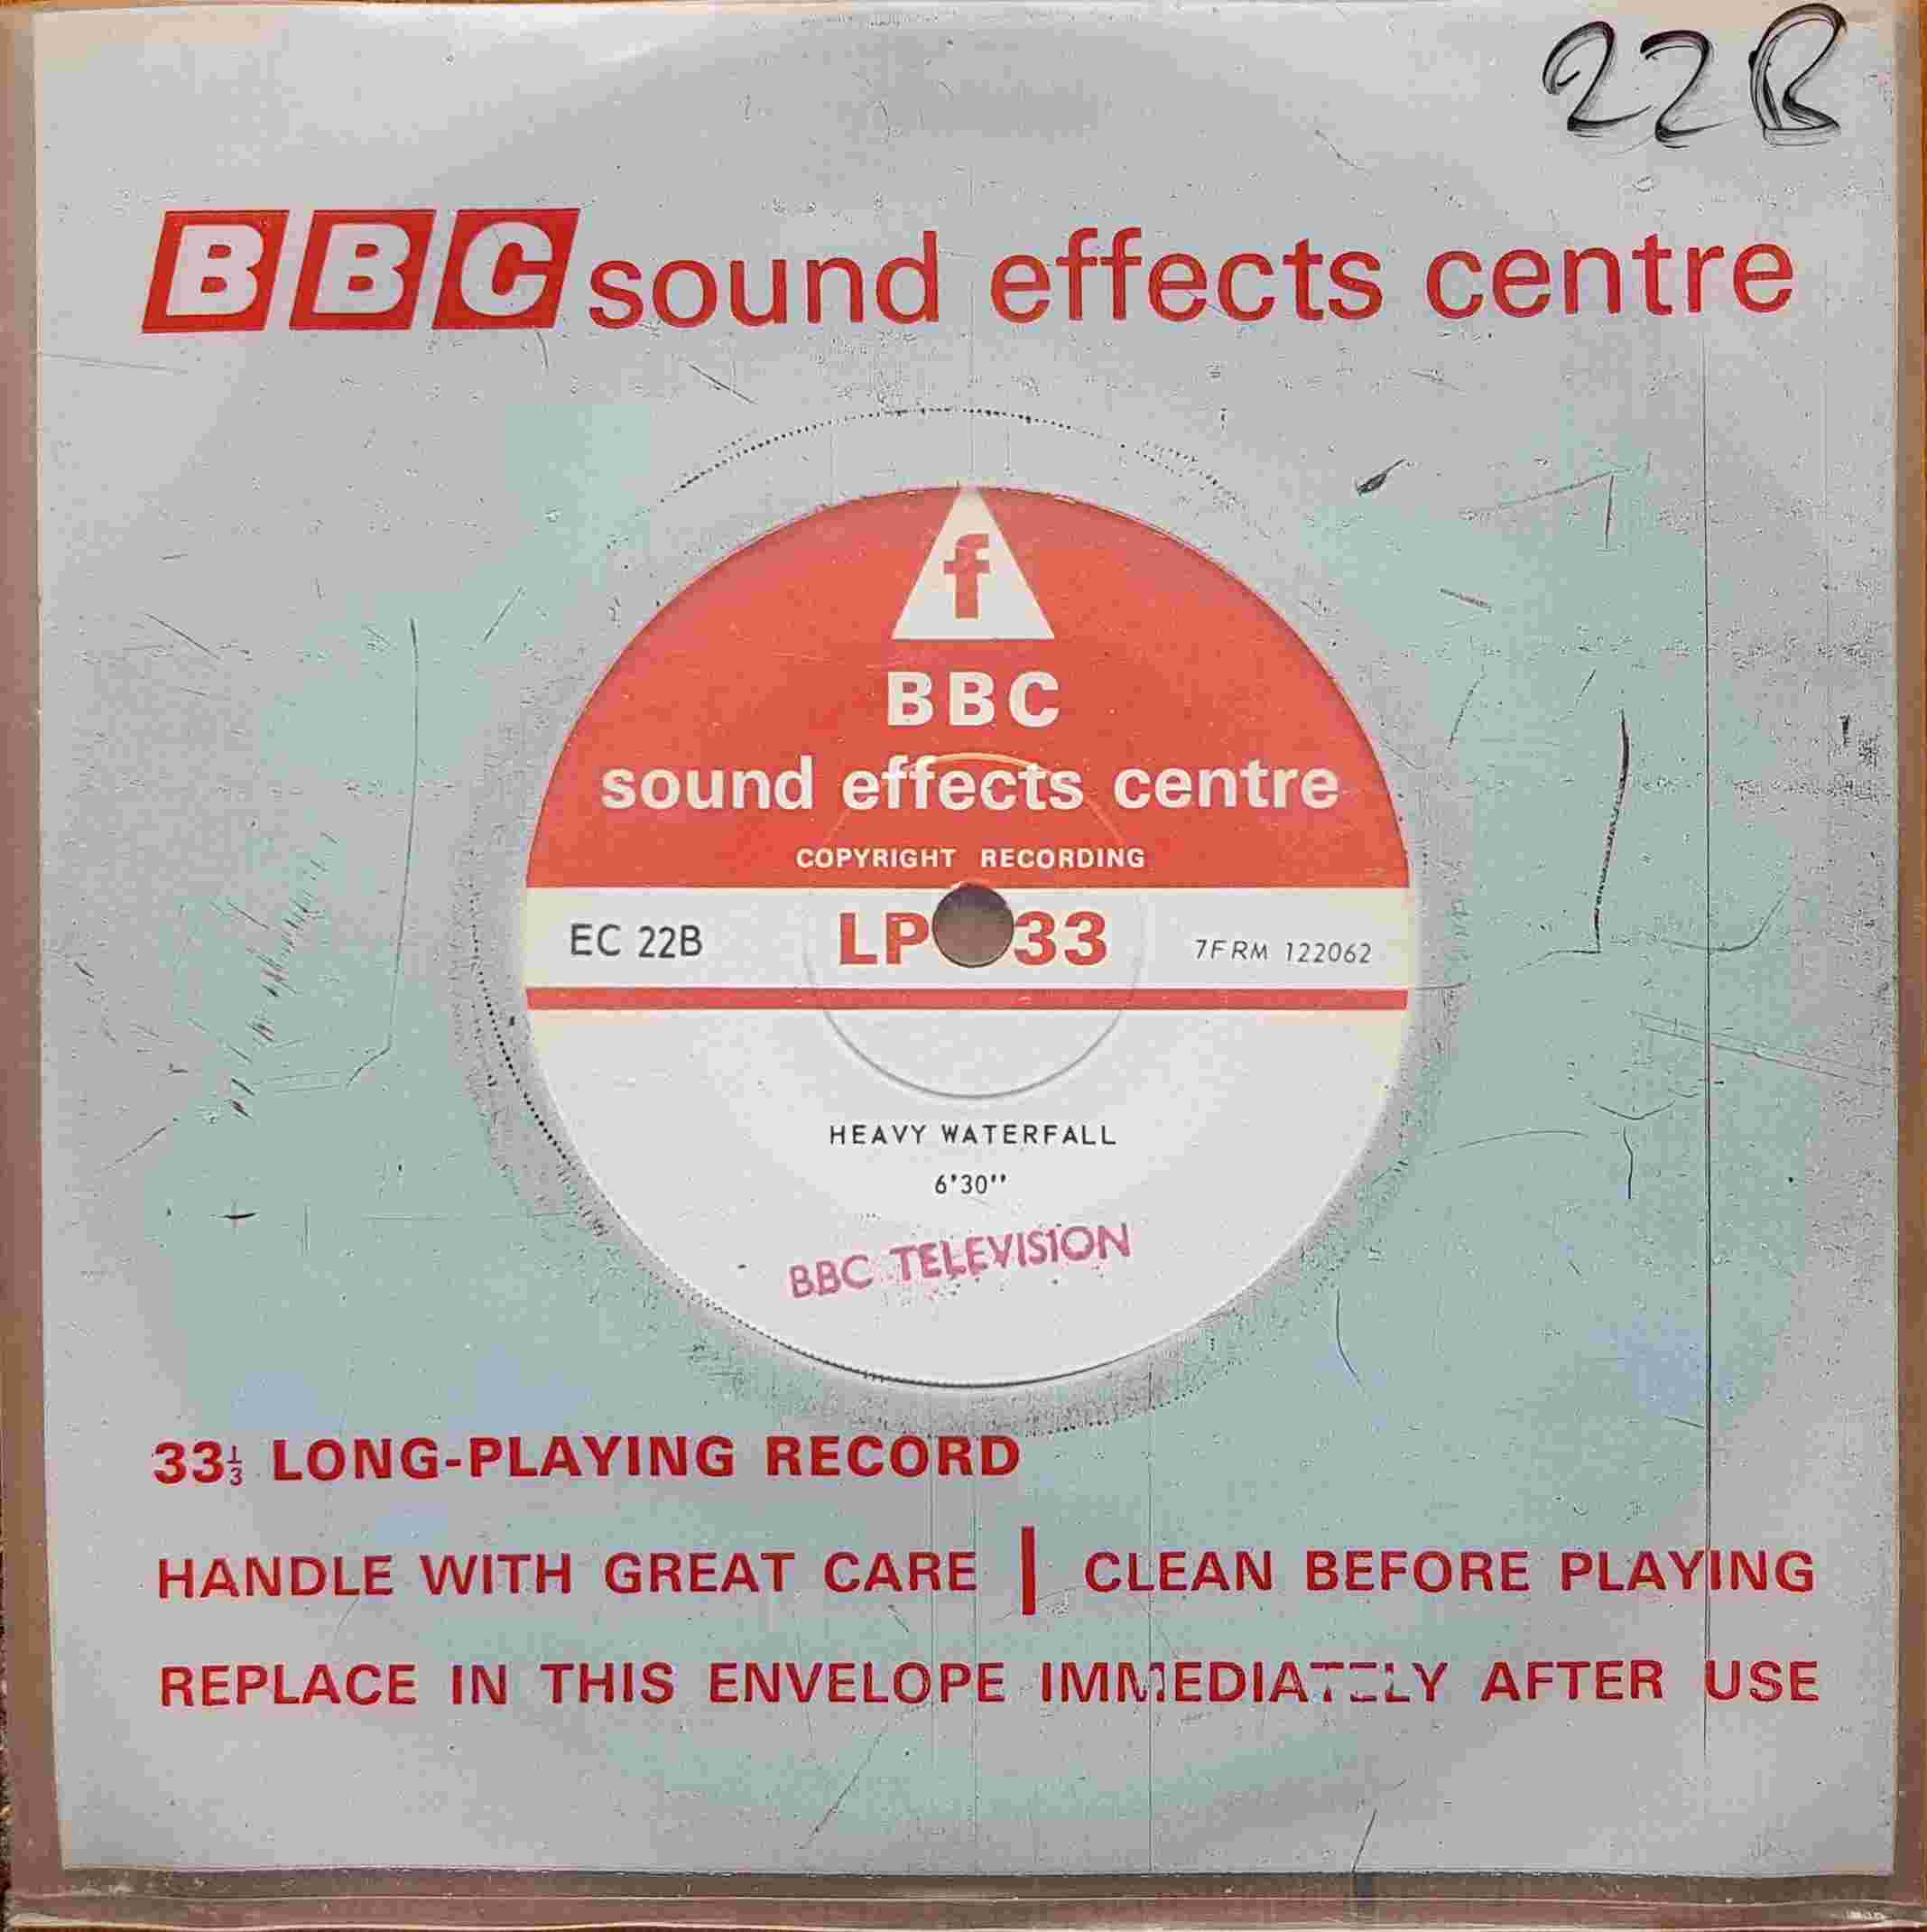 Picture of EC 22B Waterfall by artist Not registered from the BBC singles - Records and Tapes library